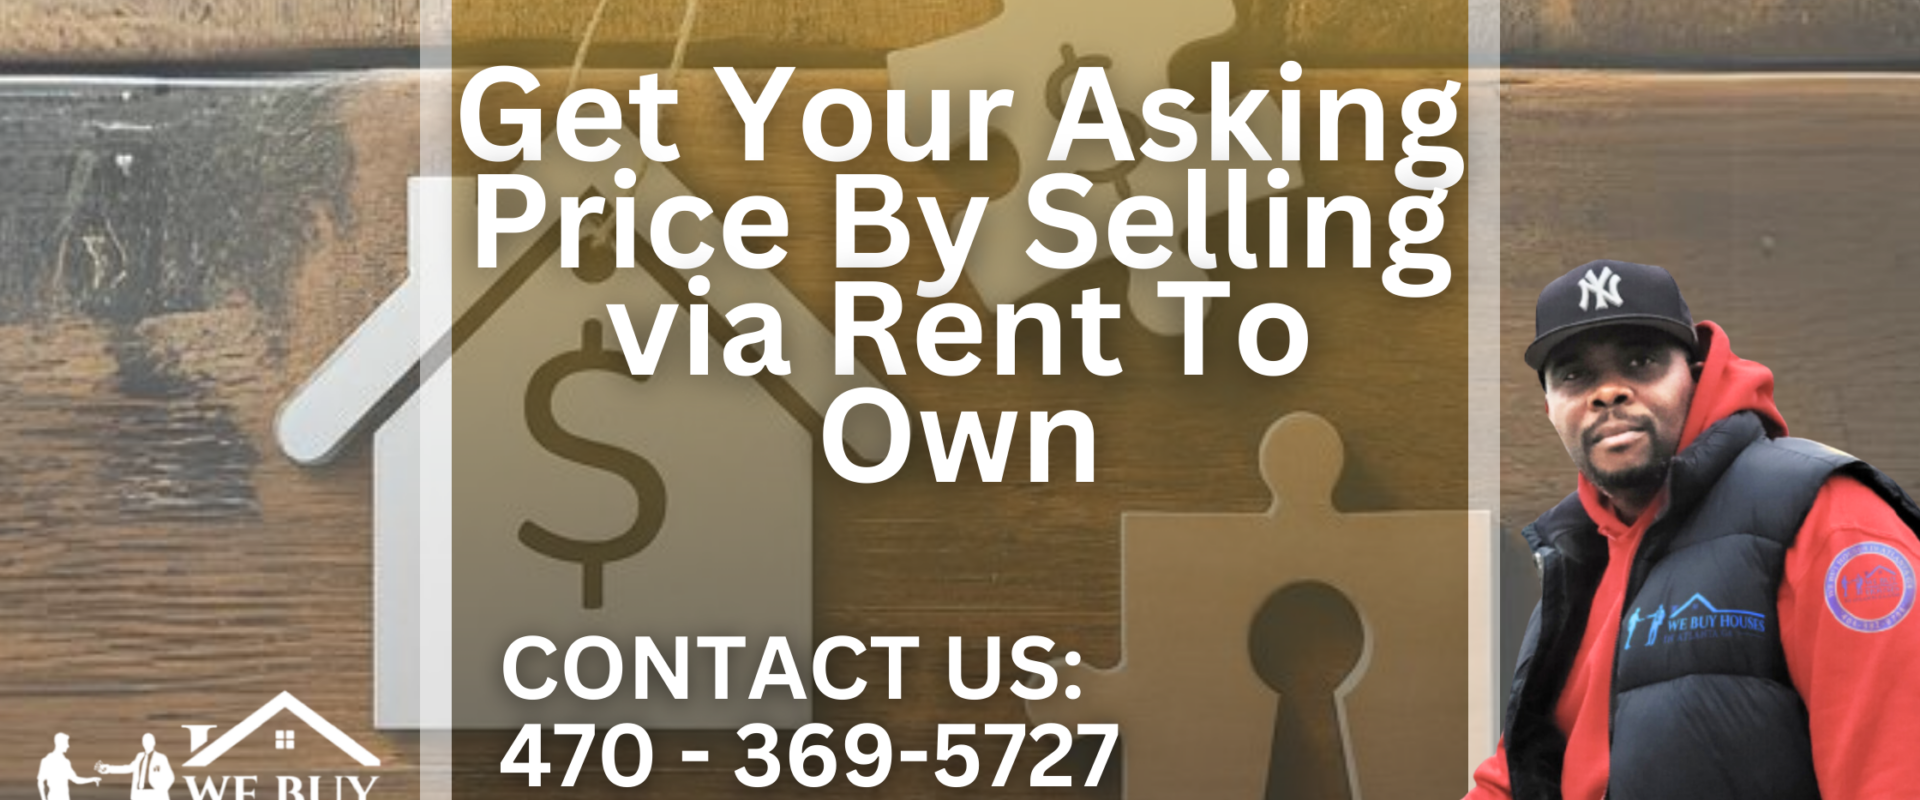 Get Your Asking Price By Selling via Rent To Own